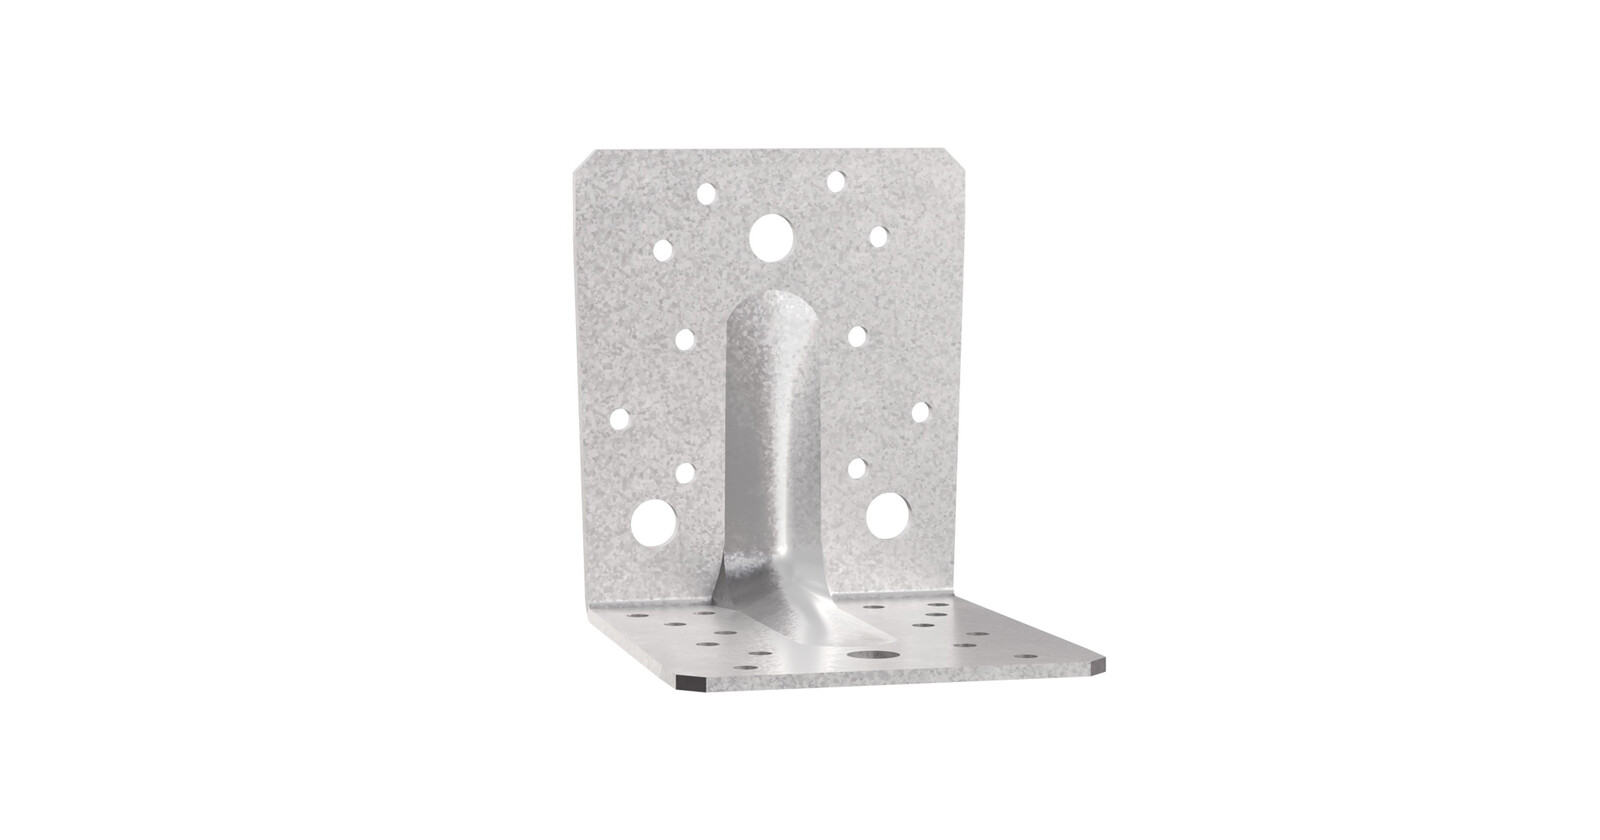 Reinforced Angle Bracket (105-R) - ABR | Simpson Strong-Tie